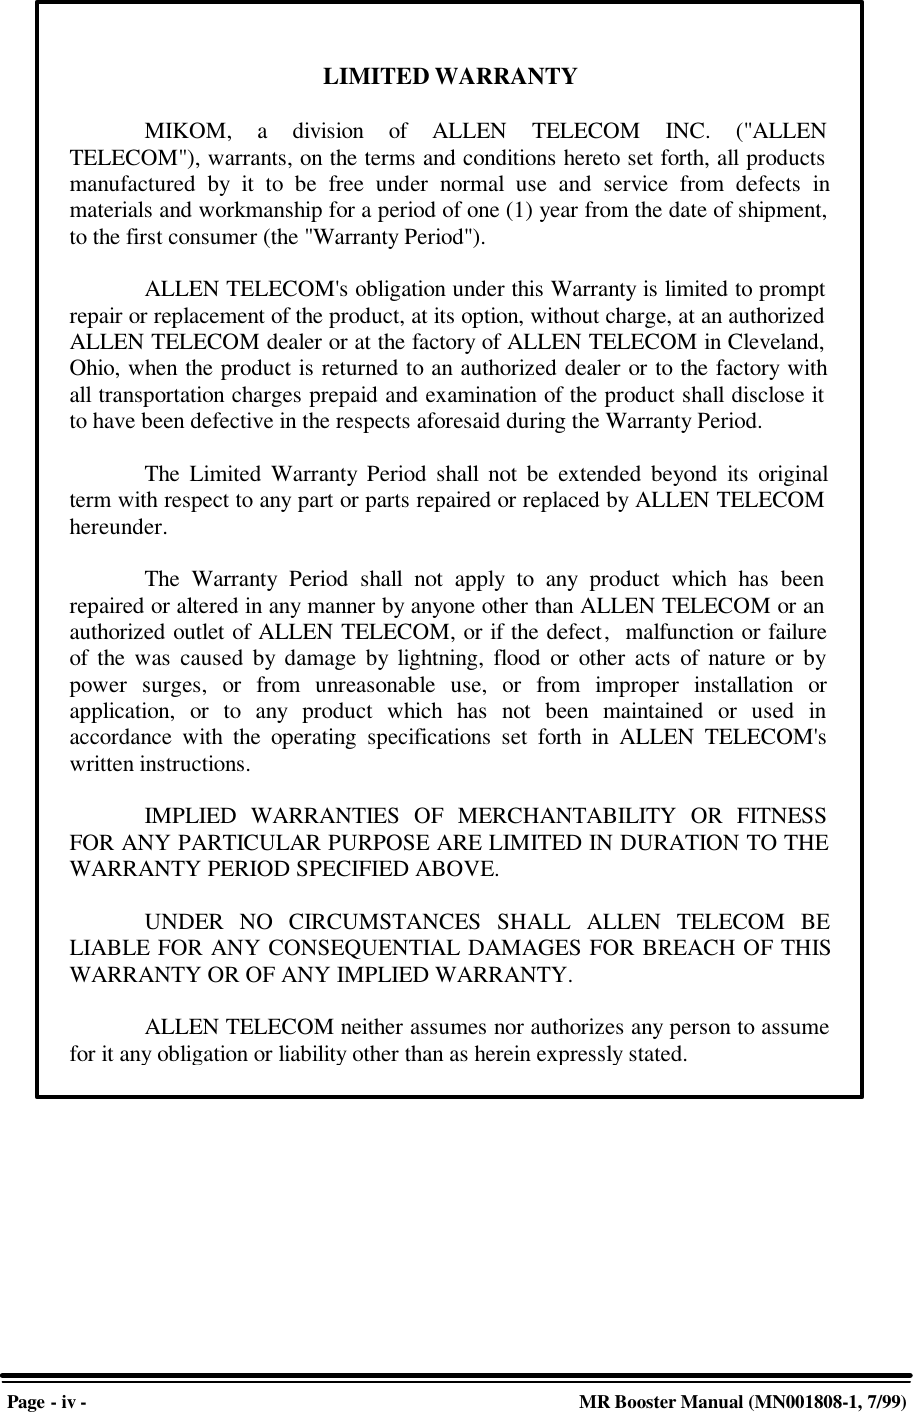 Page - iv - MR Booster Manual (MN001808-1, 7/99)LIMITED WARRANTYMIKOM, a division of ALLEN TELECOM INC. (&quot;ALLENTELECOM&quot;), warrants, on the terms and conditions hereto set forth, all productsmanufactured by it to be free under normal use and service from defects inmaterials and workmanship for a period of one (1) year from the date of shipment,to the first consumer (the &quot;Warranty Period&quot;).ALLEN TELECOM&apos;s obligation under this Warranty is limited to promptrepair or replacement of the product, at its option, without charge, at an authorizedALLEN TELECOM dealer or at the factory of ALLEN TELECOM in Cleveland,Ohio, when the product is returned to an authorized dealer or to the factory withall transportation charges prepaid and examination of the product shall disclose itto have been defective in the respects aforesaid during the Warranty Period.The Limited Warranty Period shall not be extended beyond its originalterm with respect to any part or parts repaired or replaced by ALLEN TELECOMhereunder.The Warranty Period shall not apply to any product which has beenrepaired or altered in any manner by anyone other than ALLEN TELECOM or anauthorized outlet of ALLEN TELECOM, or if the defect,  malfunction or failureof the was caused by damage by lightning, flood or other acts of nature or bypower surges, or from unreasonable use, or from improper installation orapplication, or to any product which has not been maintained or used inaccordance with the operating specifications set forth in ALLEN TELECOM&apos;swritten instructions.IMPLIED WARRANTIES OF MERCHANTABILITY OR FITNESSFOR ANY PARTICULAR PURPOSE ARE LIMITED IN DURATION TO THEWARRANTY PERIOD SPECIFIED ABOVE.UNDER NO CIRCUMSTANCES SHALL ALLEN TELECOM BELIABLE FOR ANY CONSEQUENTIAL DAMAGES FOR BREACH OF THISWARRANTY OR OF ANY IMPLIED WARRANTY.ALLEN TELECOM neither assumes nor authorizes any person to assumefor it any obligation or liability other than as herein expressly stated.